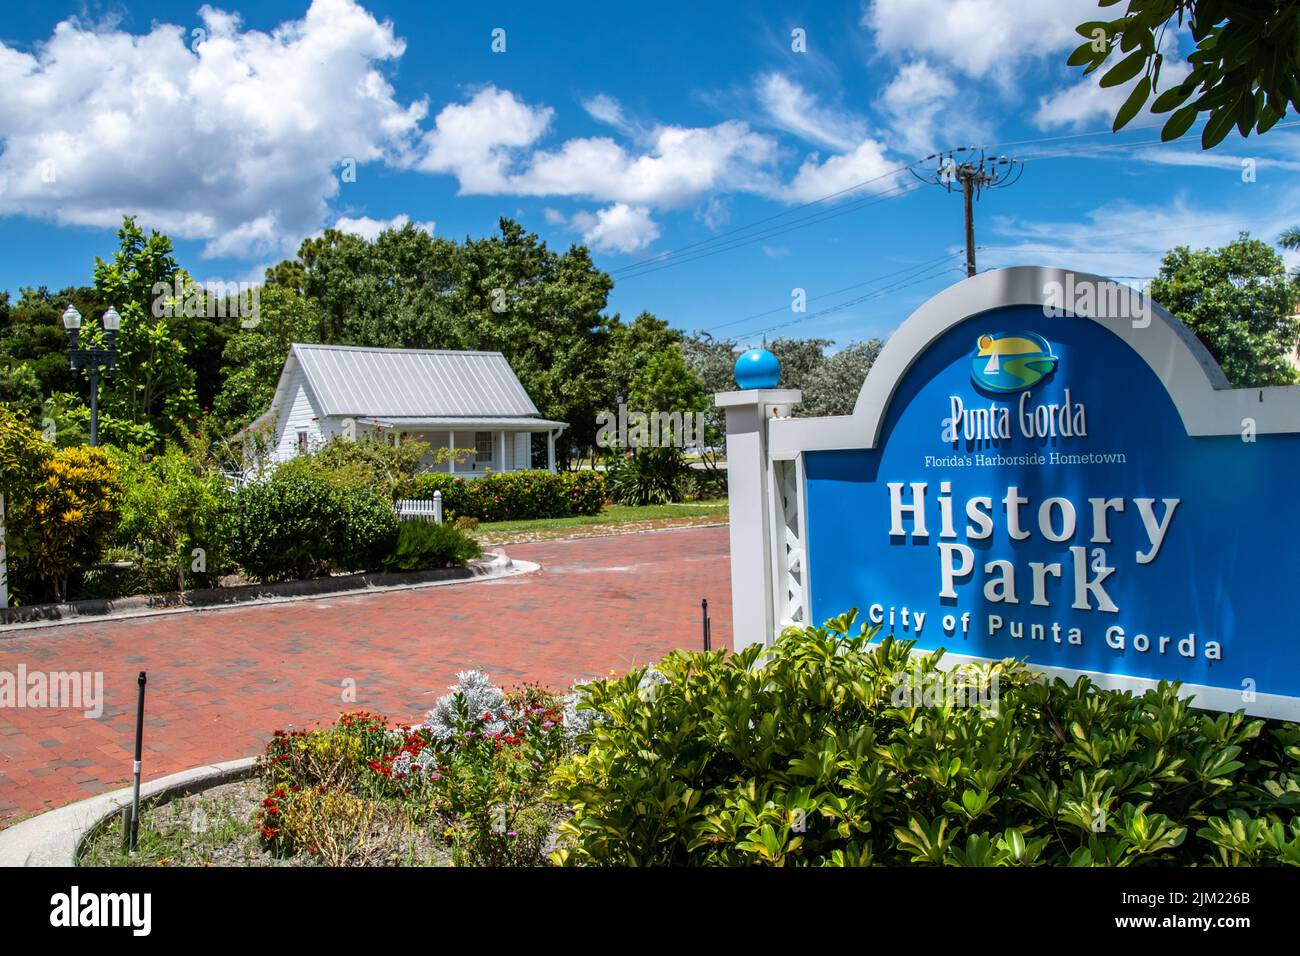 History Park and Butterfly Garden in Punta Gorda, Florida, Charlotte County in Southwest Florida near the Peace River, Gulf Coast. Stock Photo